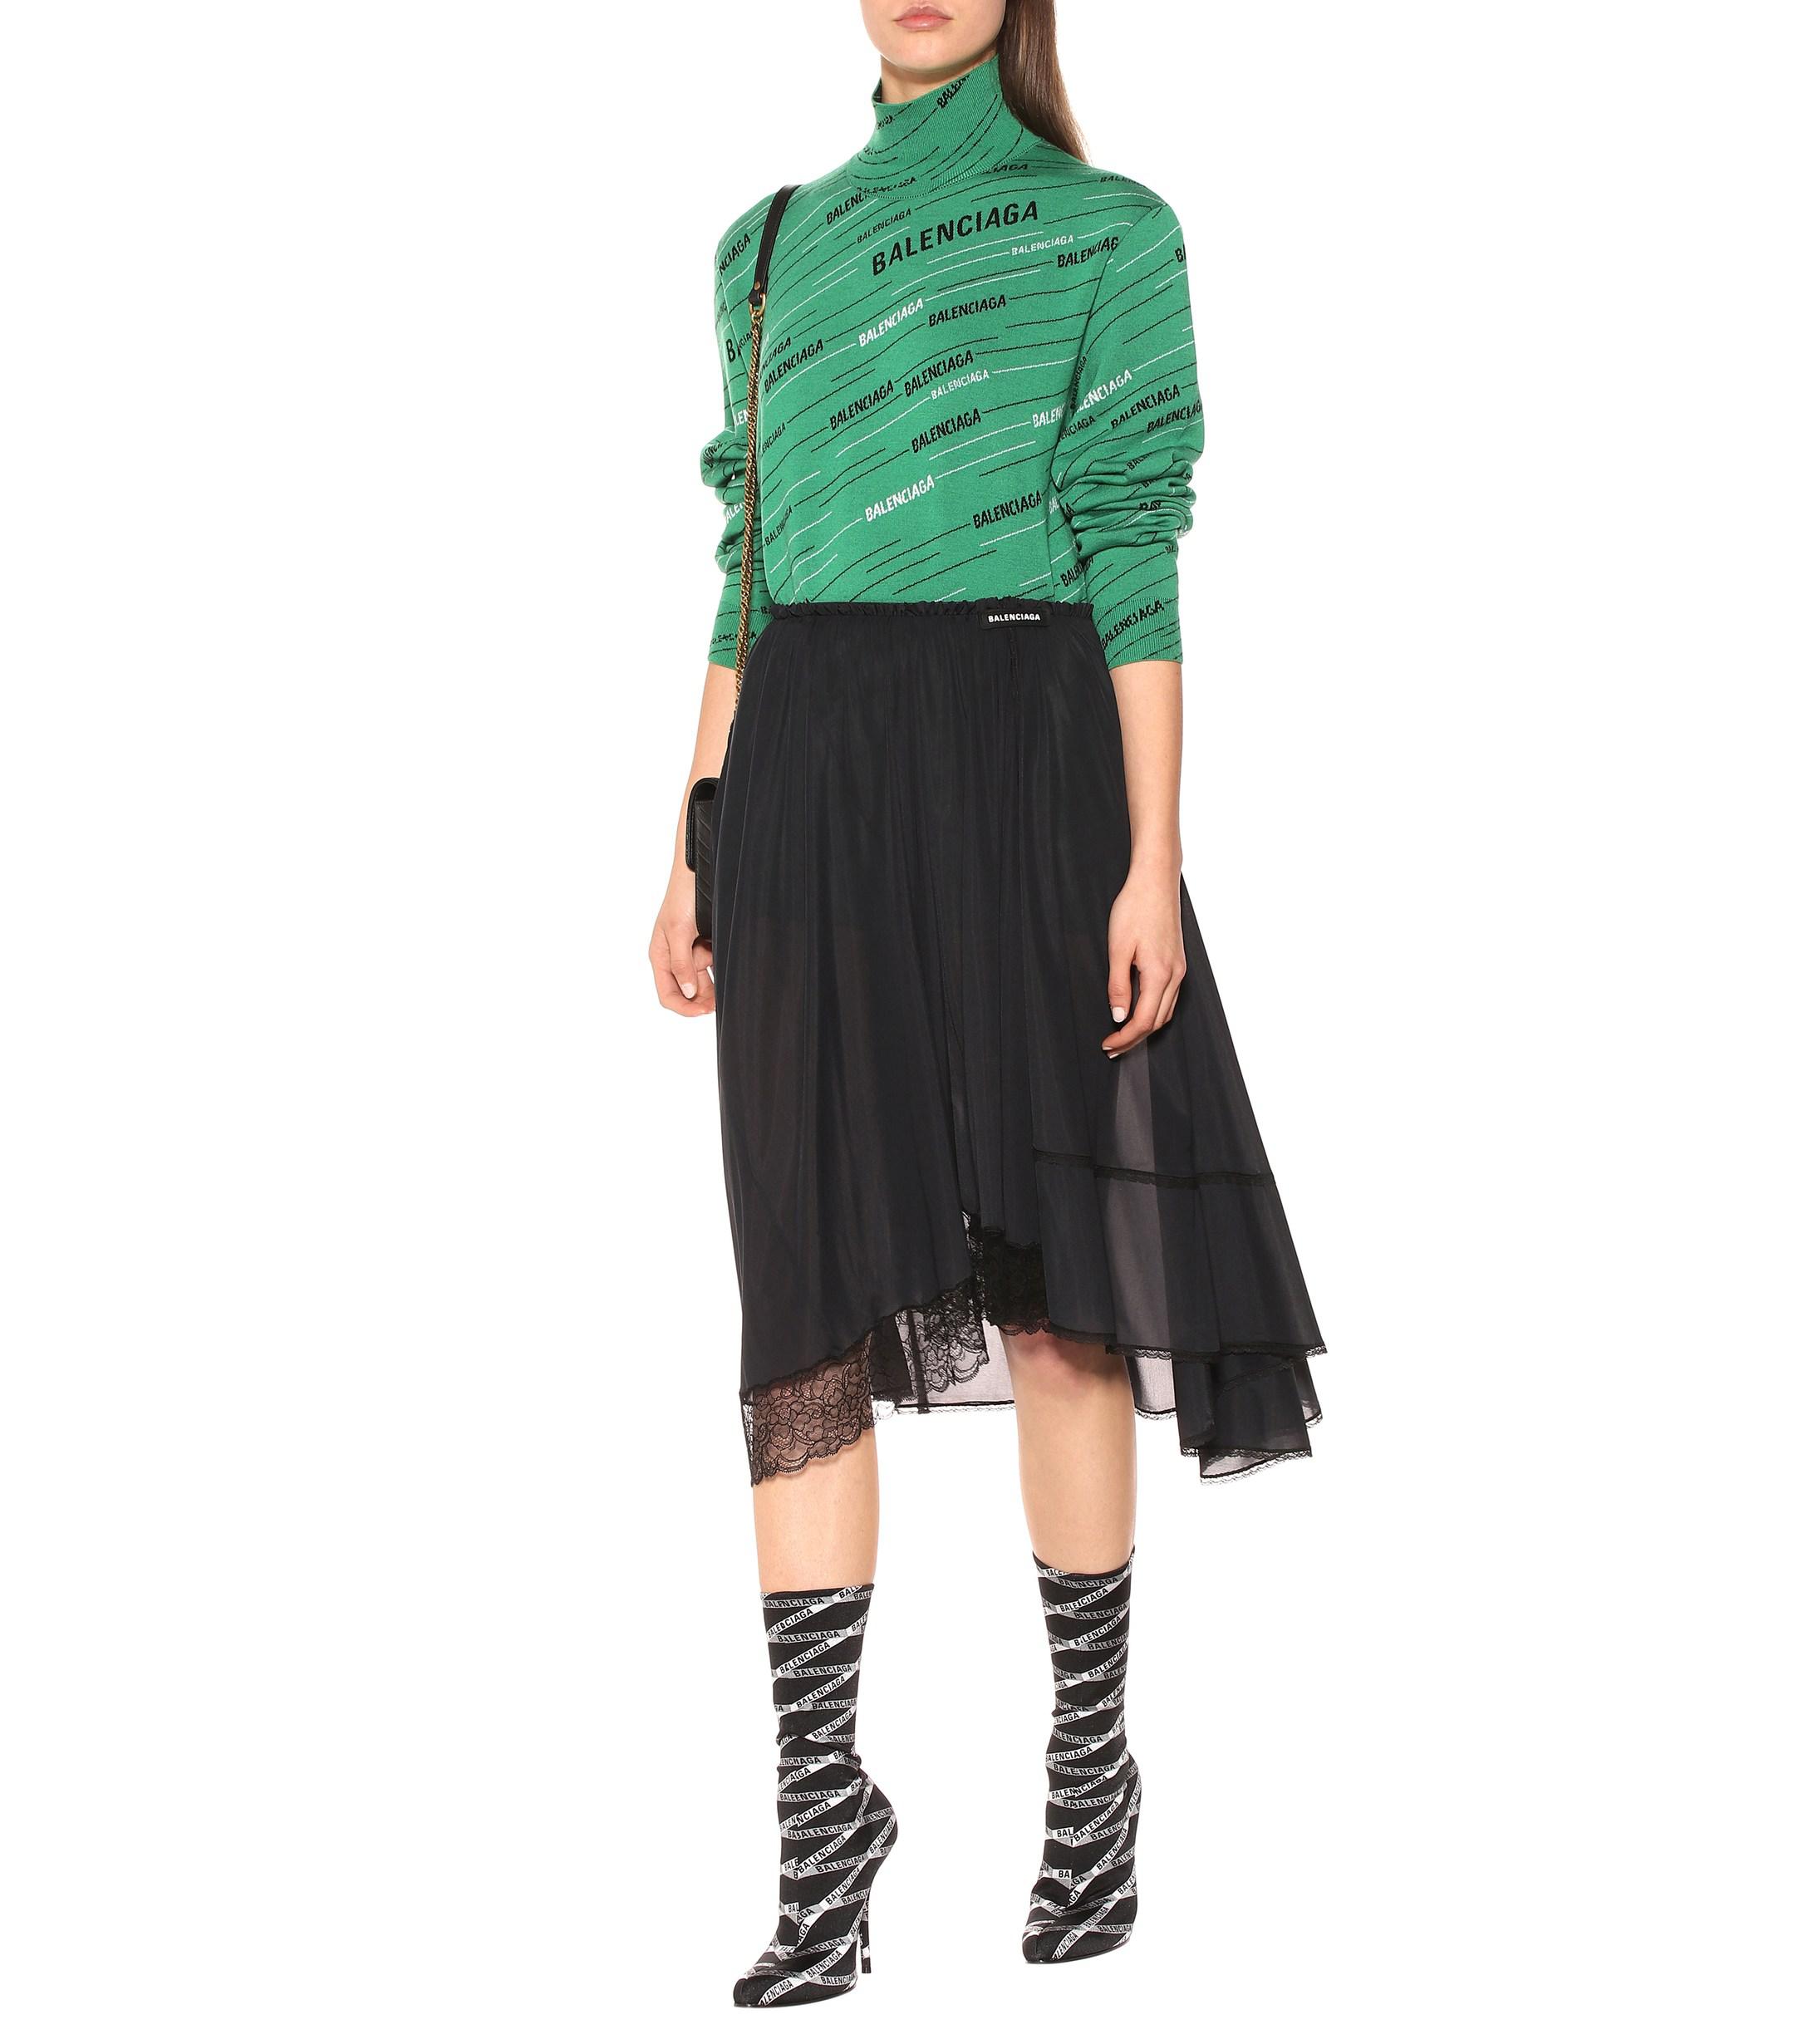 Balenciaga Lace-trimmed Jersey Skirt in Black - Lyst